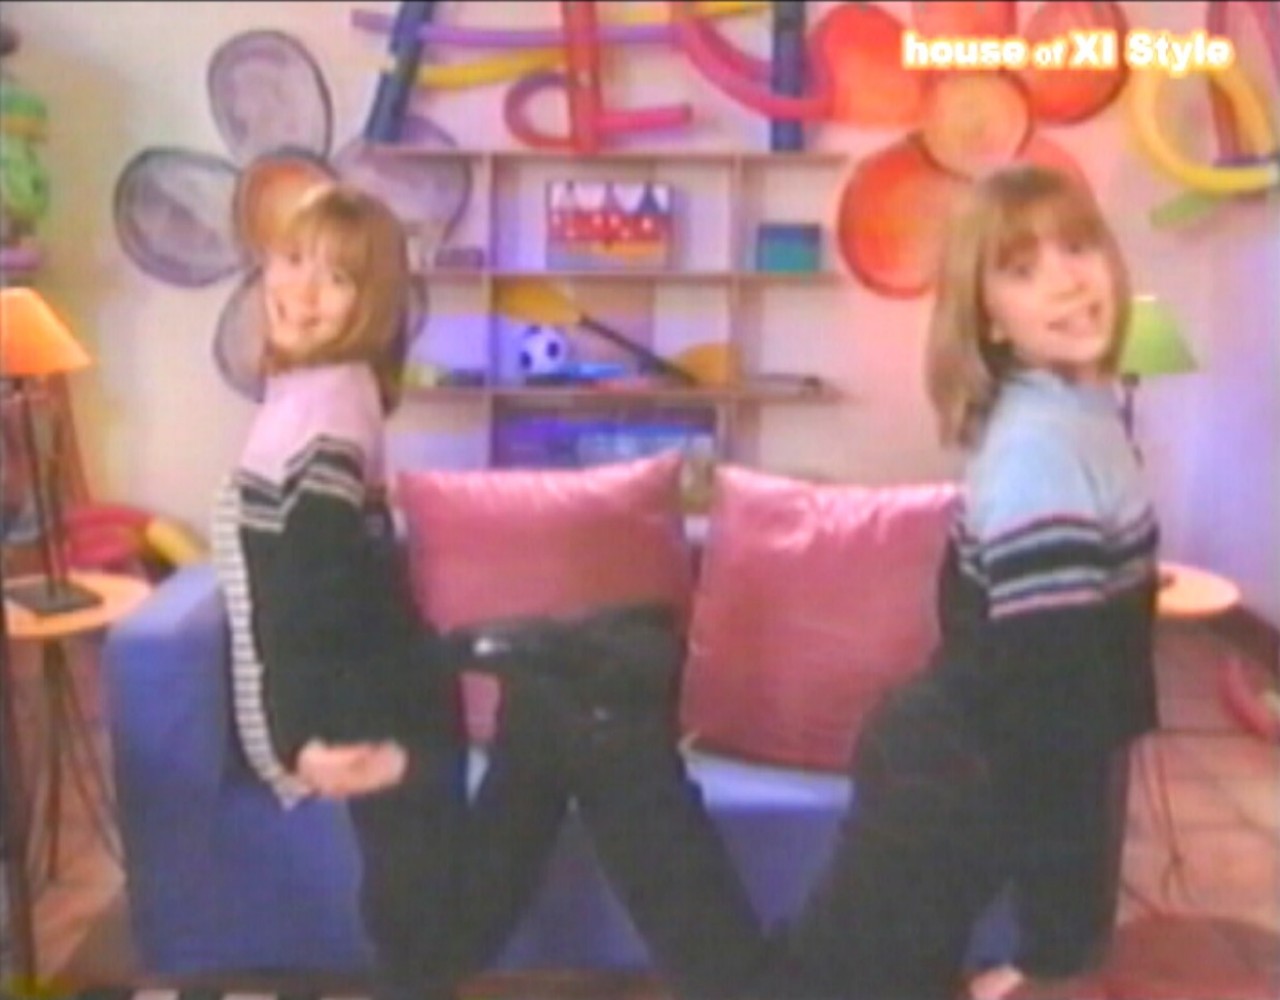 Click to get House of XI Style Mary Kate and Ashley! Desktop background!